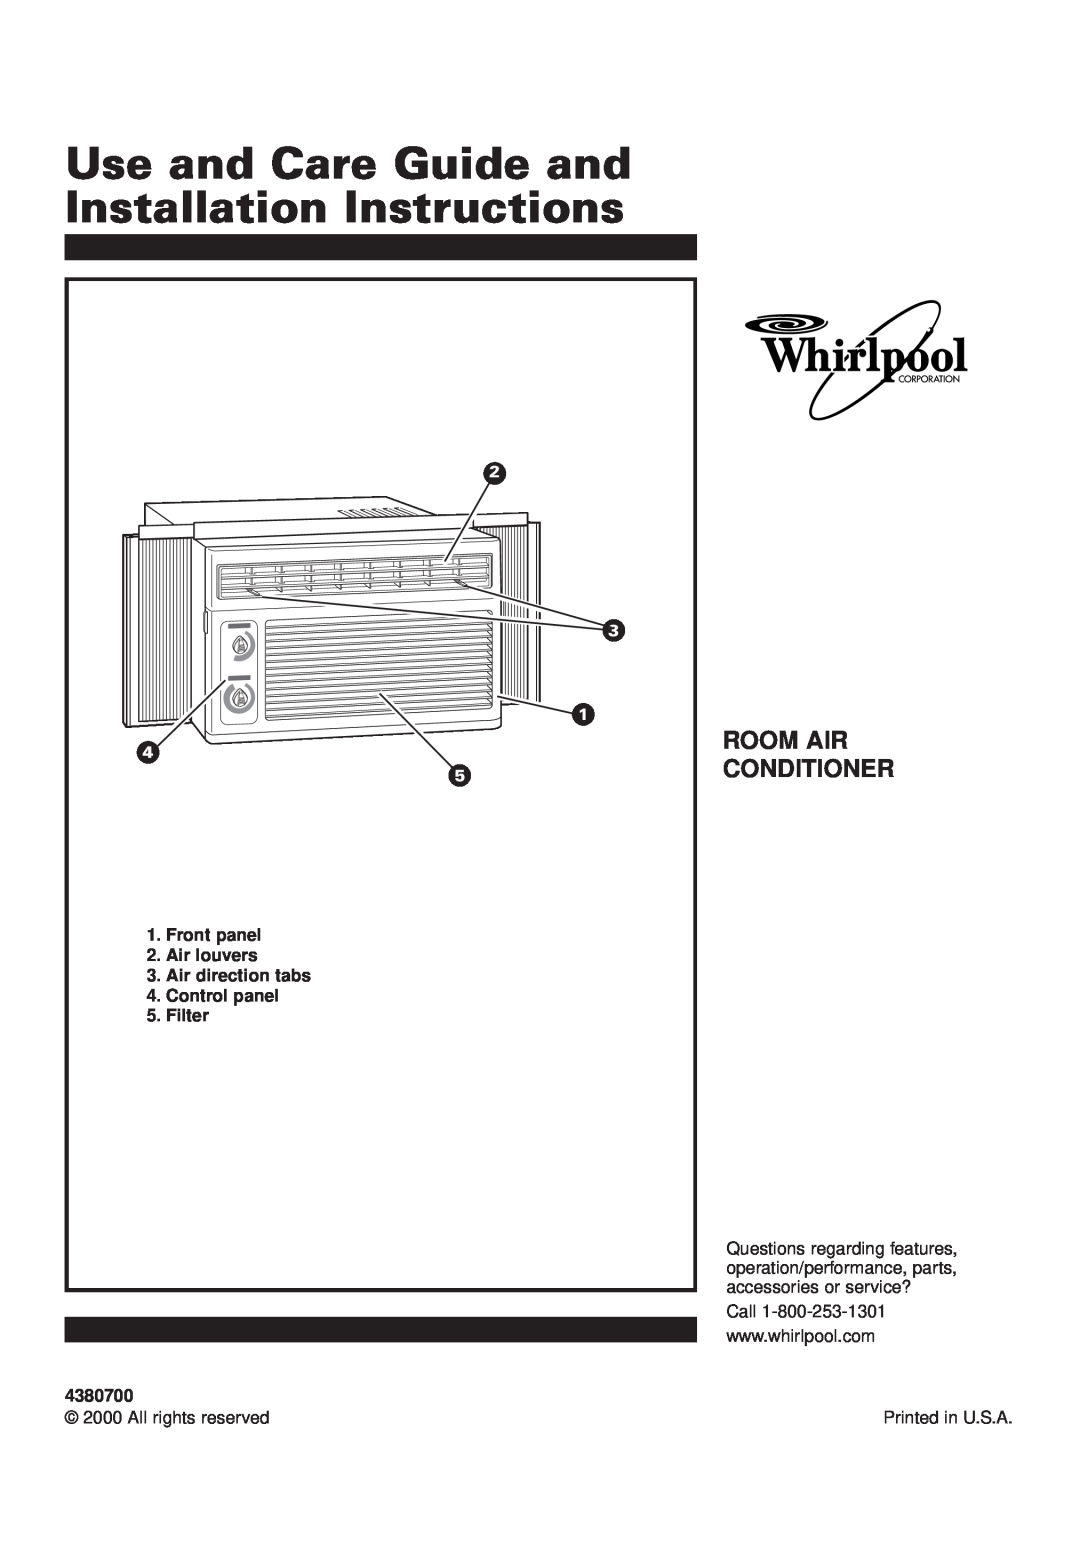 Whirlpool ACD052PK0 installation instructions Use and Care Guide and Installation Instructions, Room Air Conditioner 